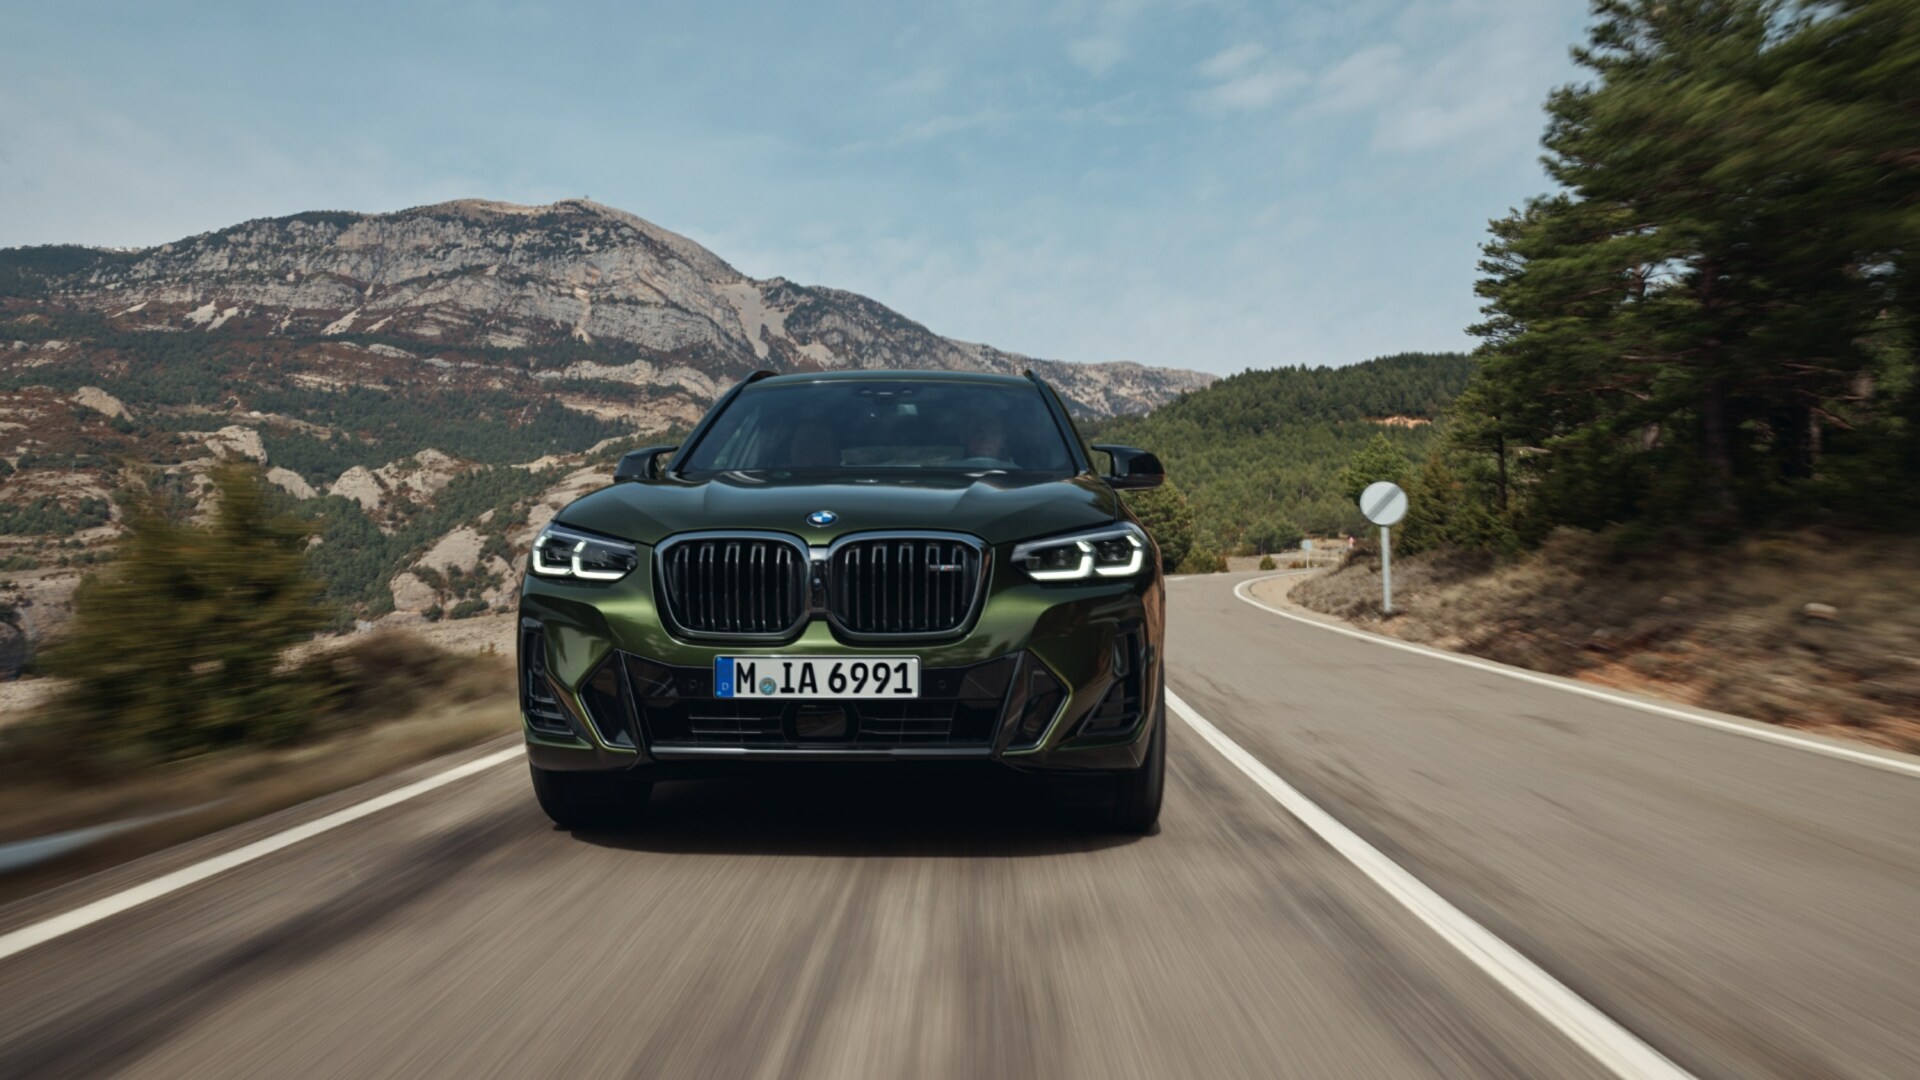 The Front Profile Of The BMW X3 M40i